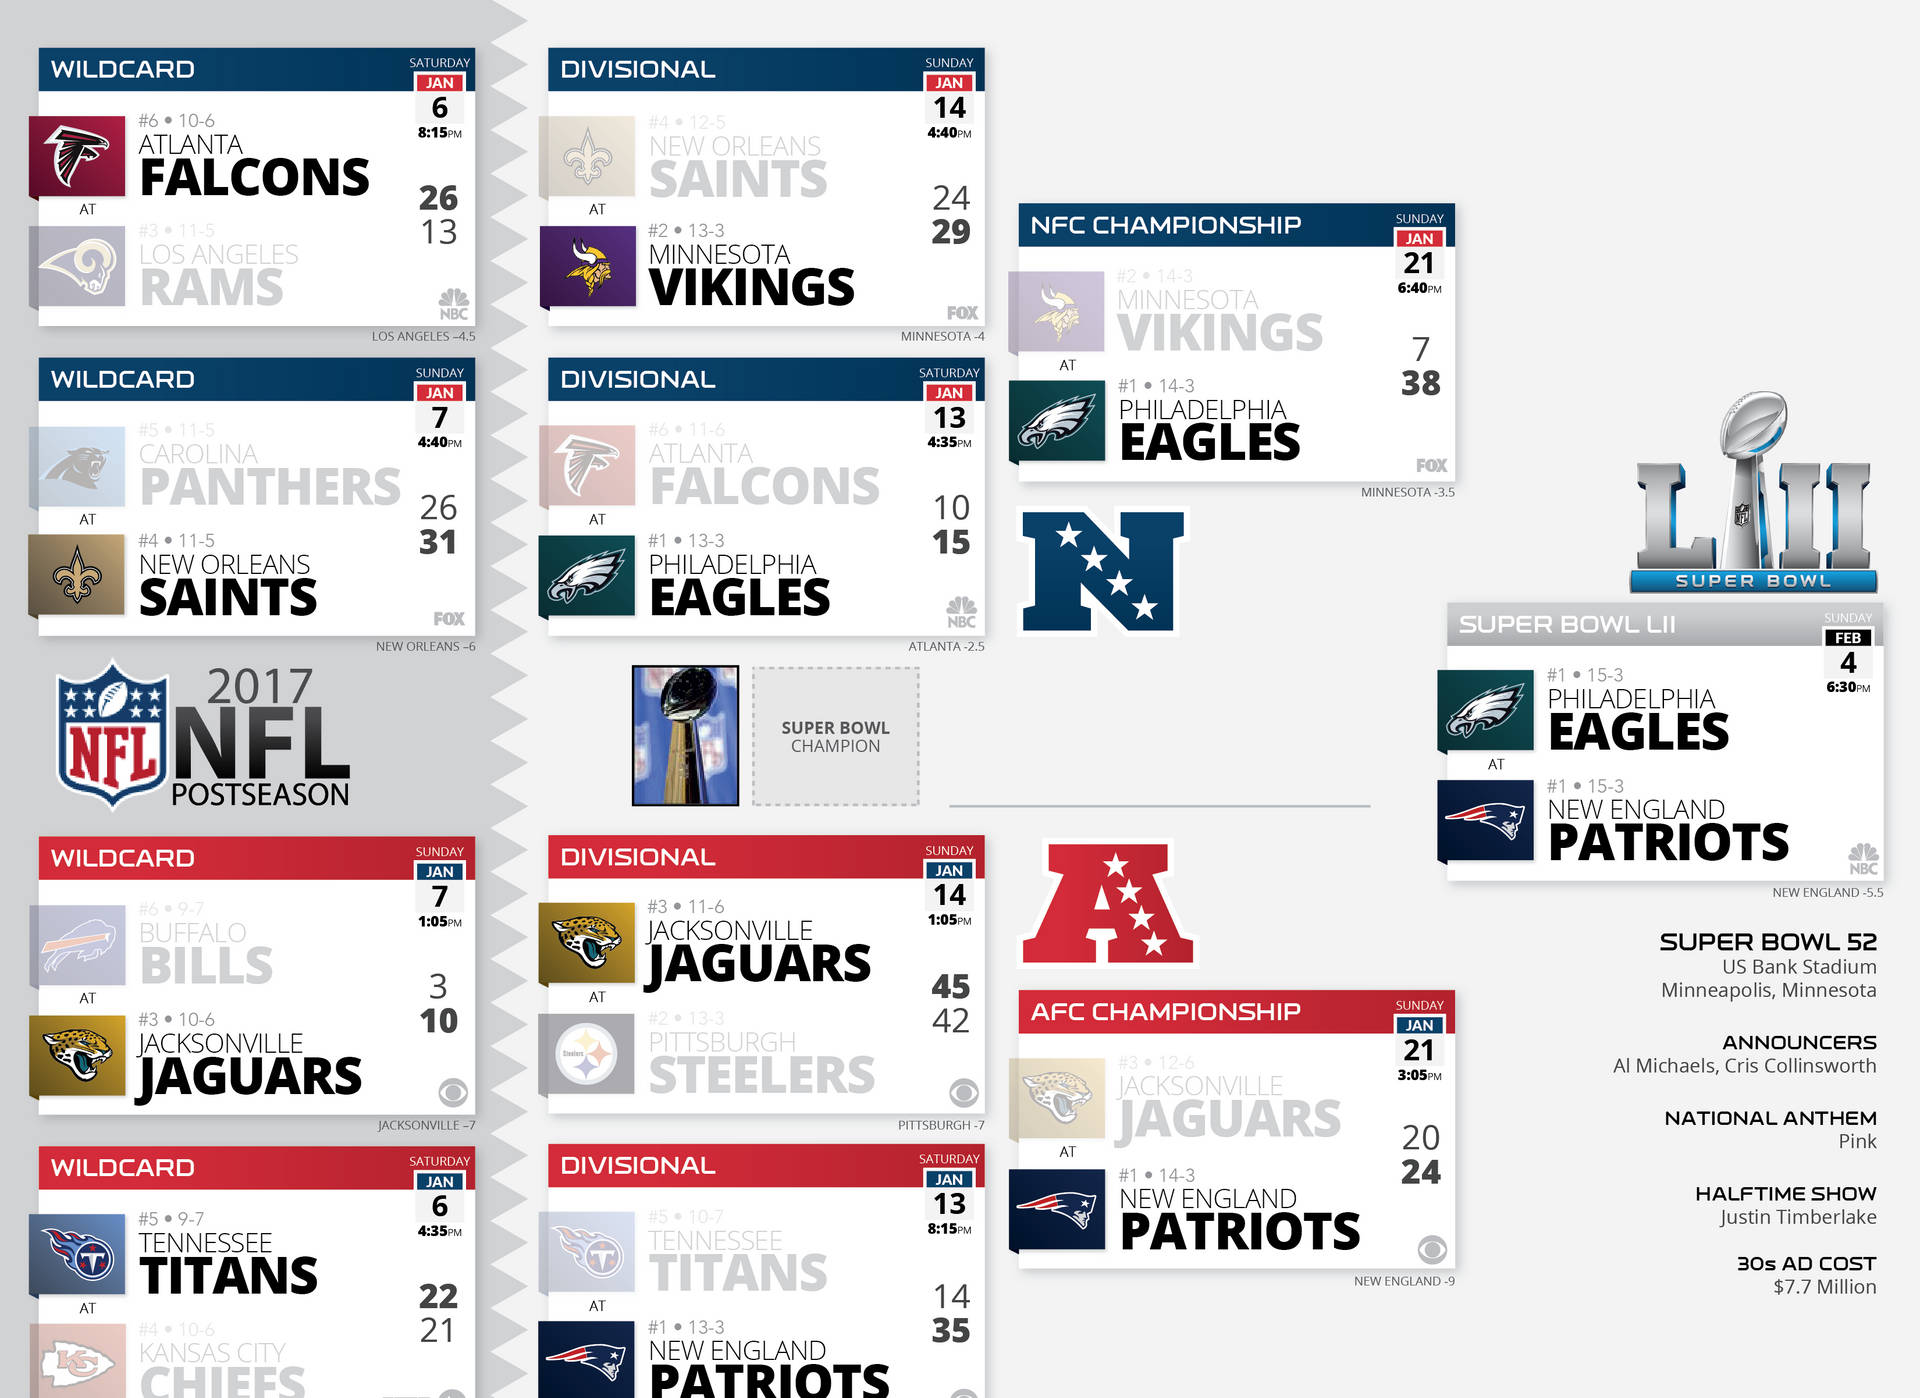 nfl playoff results